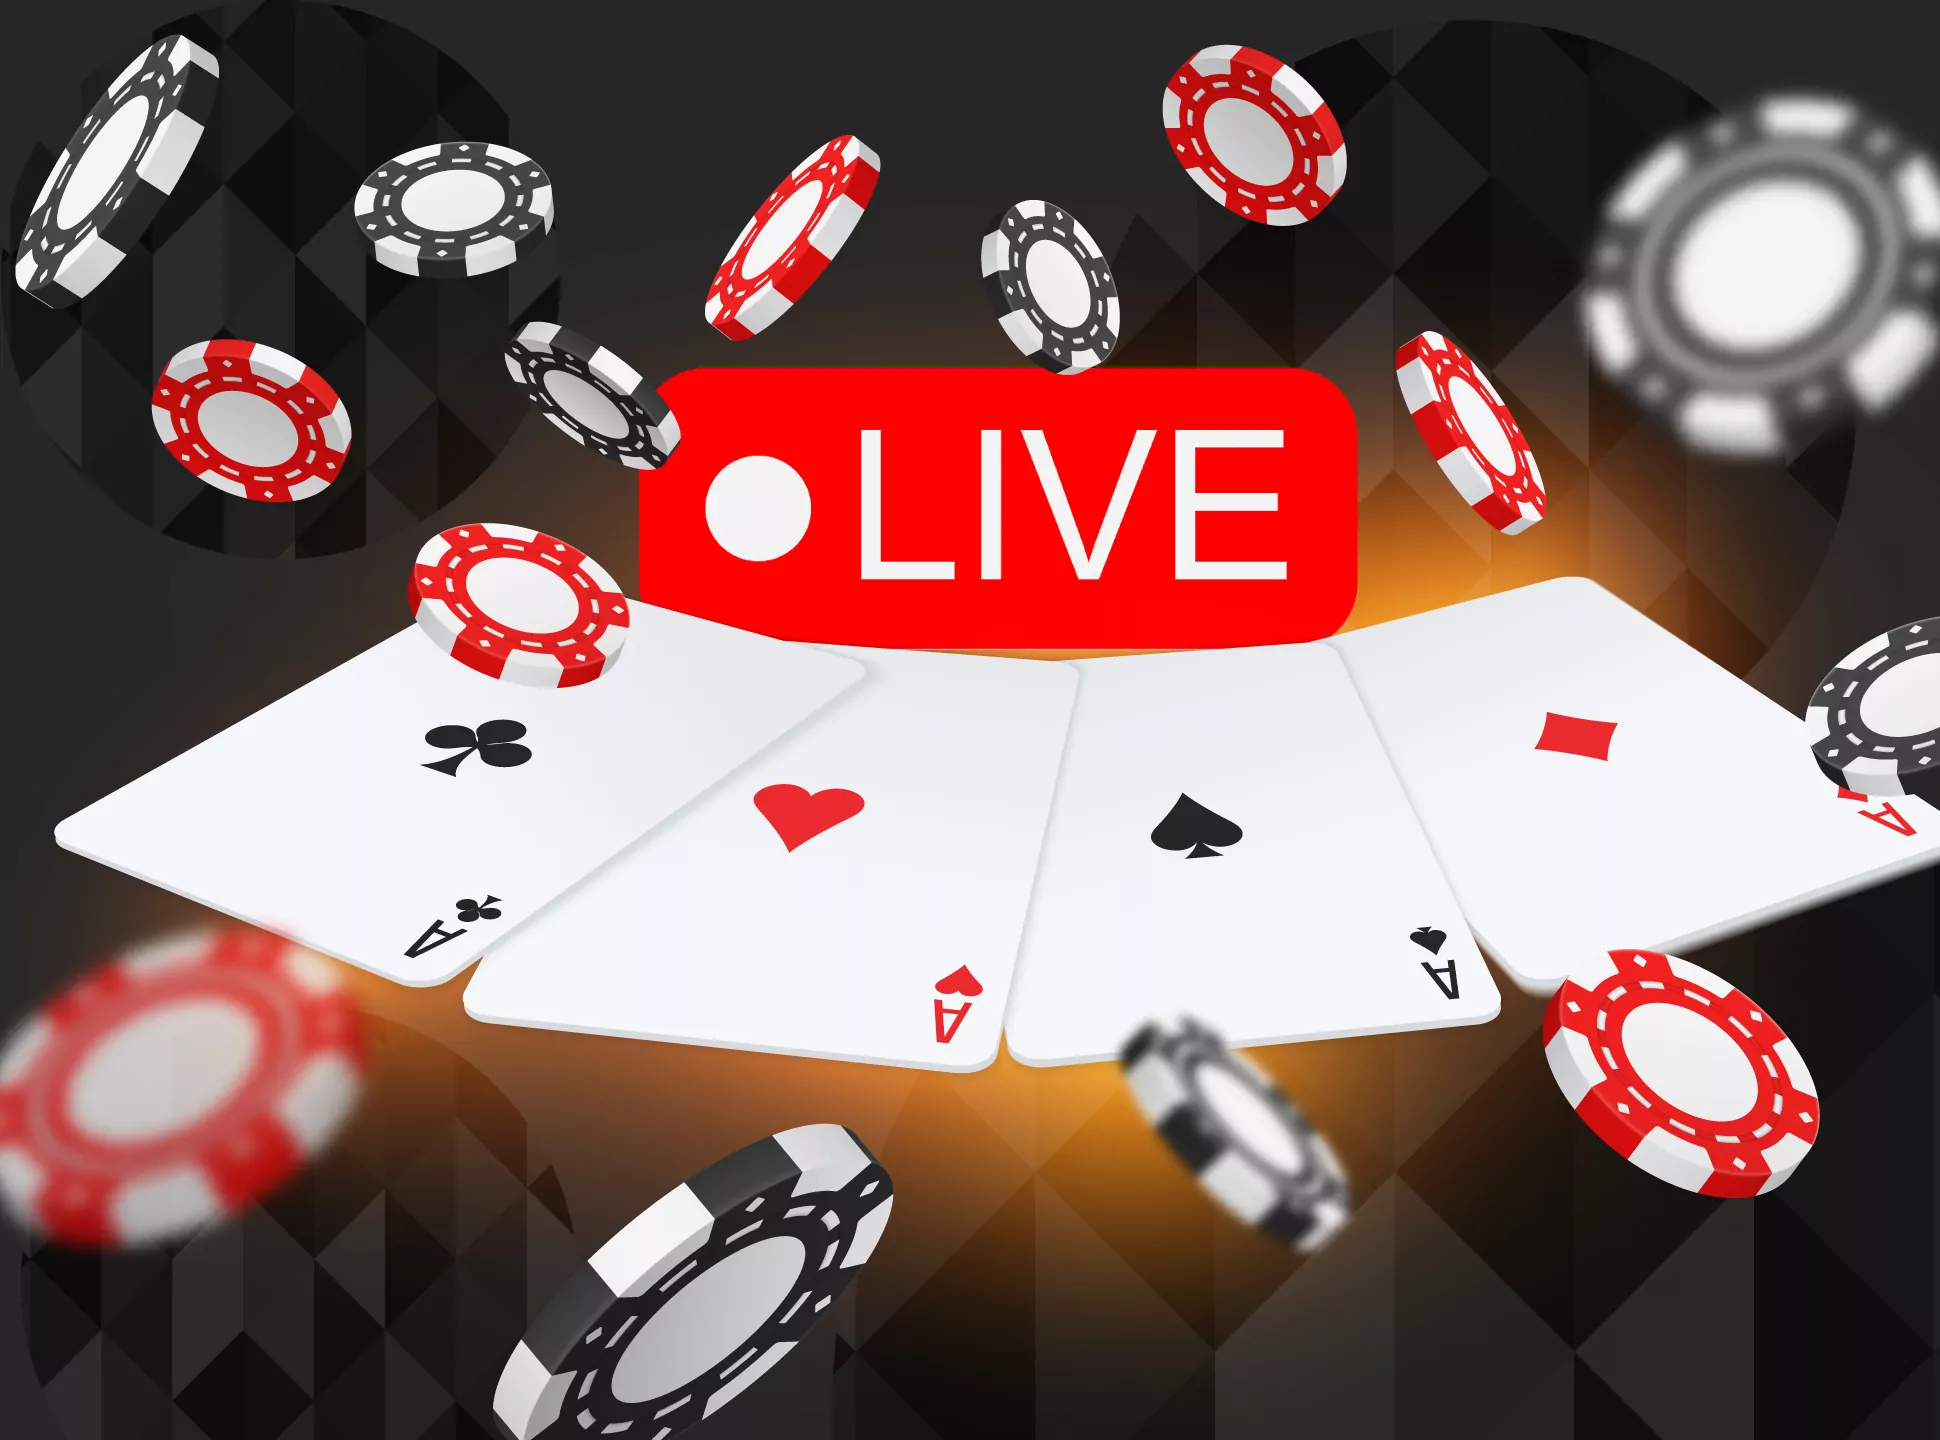 Play Holdem poker against the real dealer in the live casino.